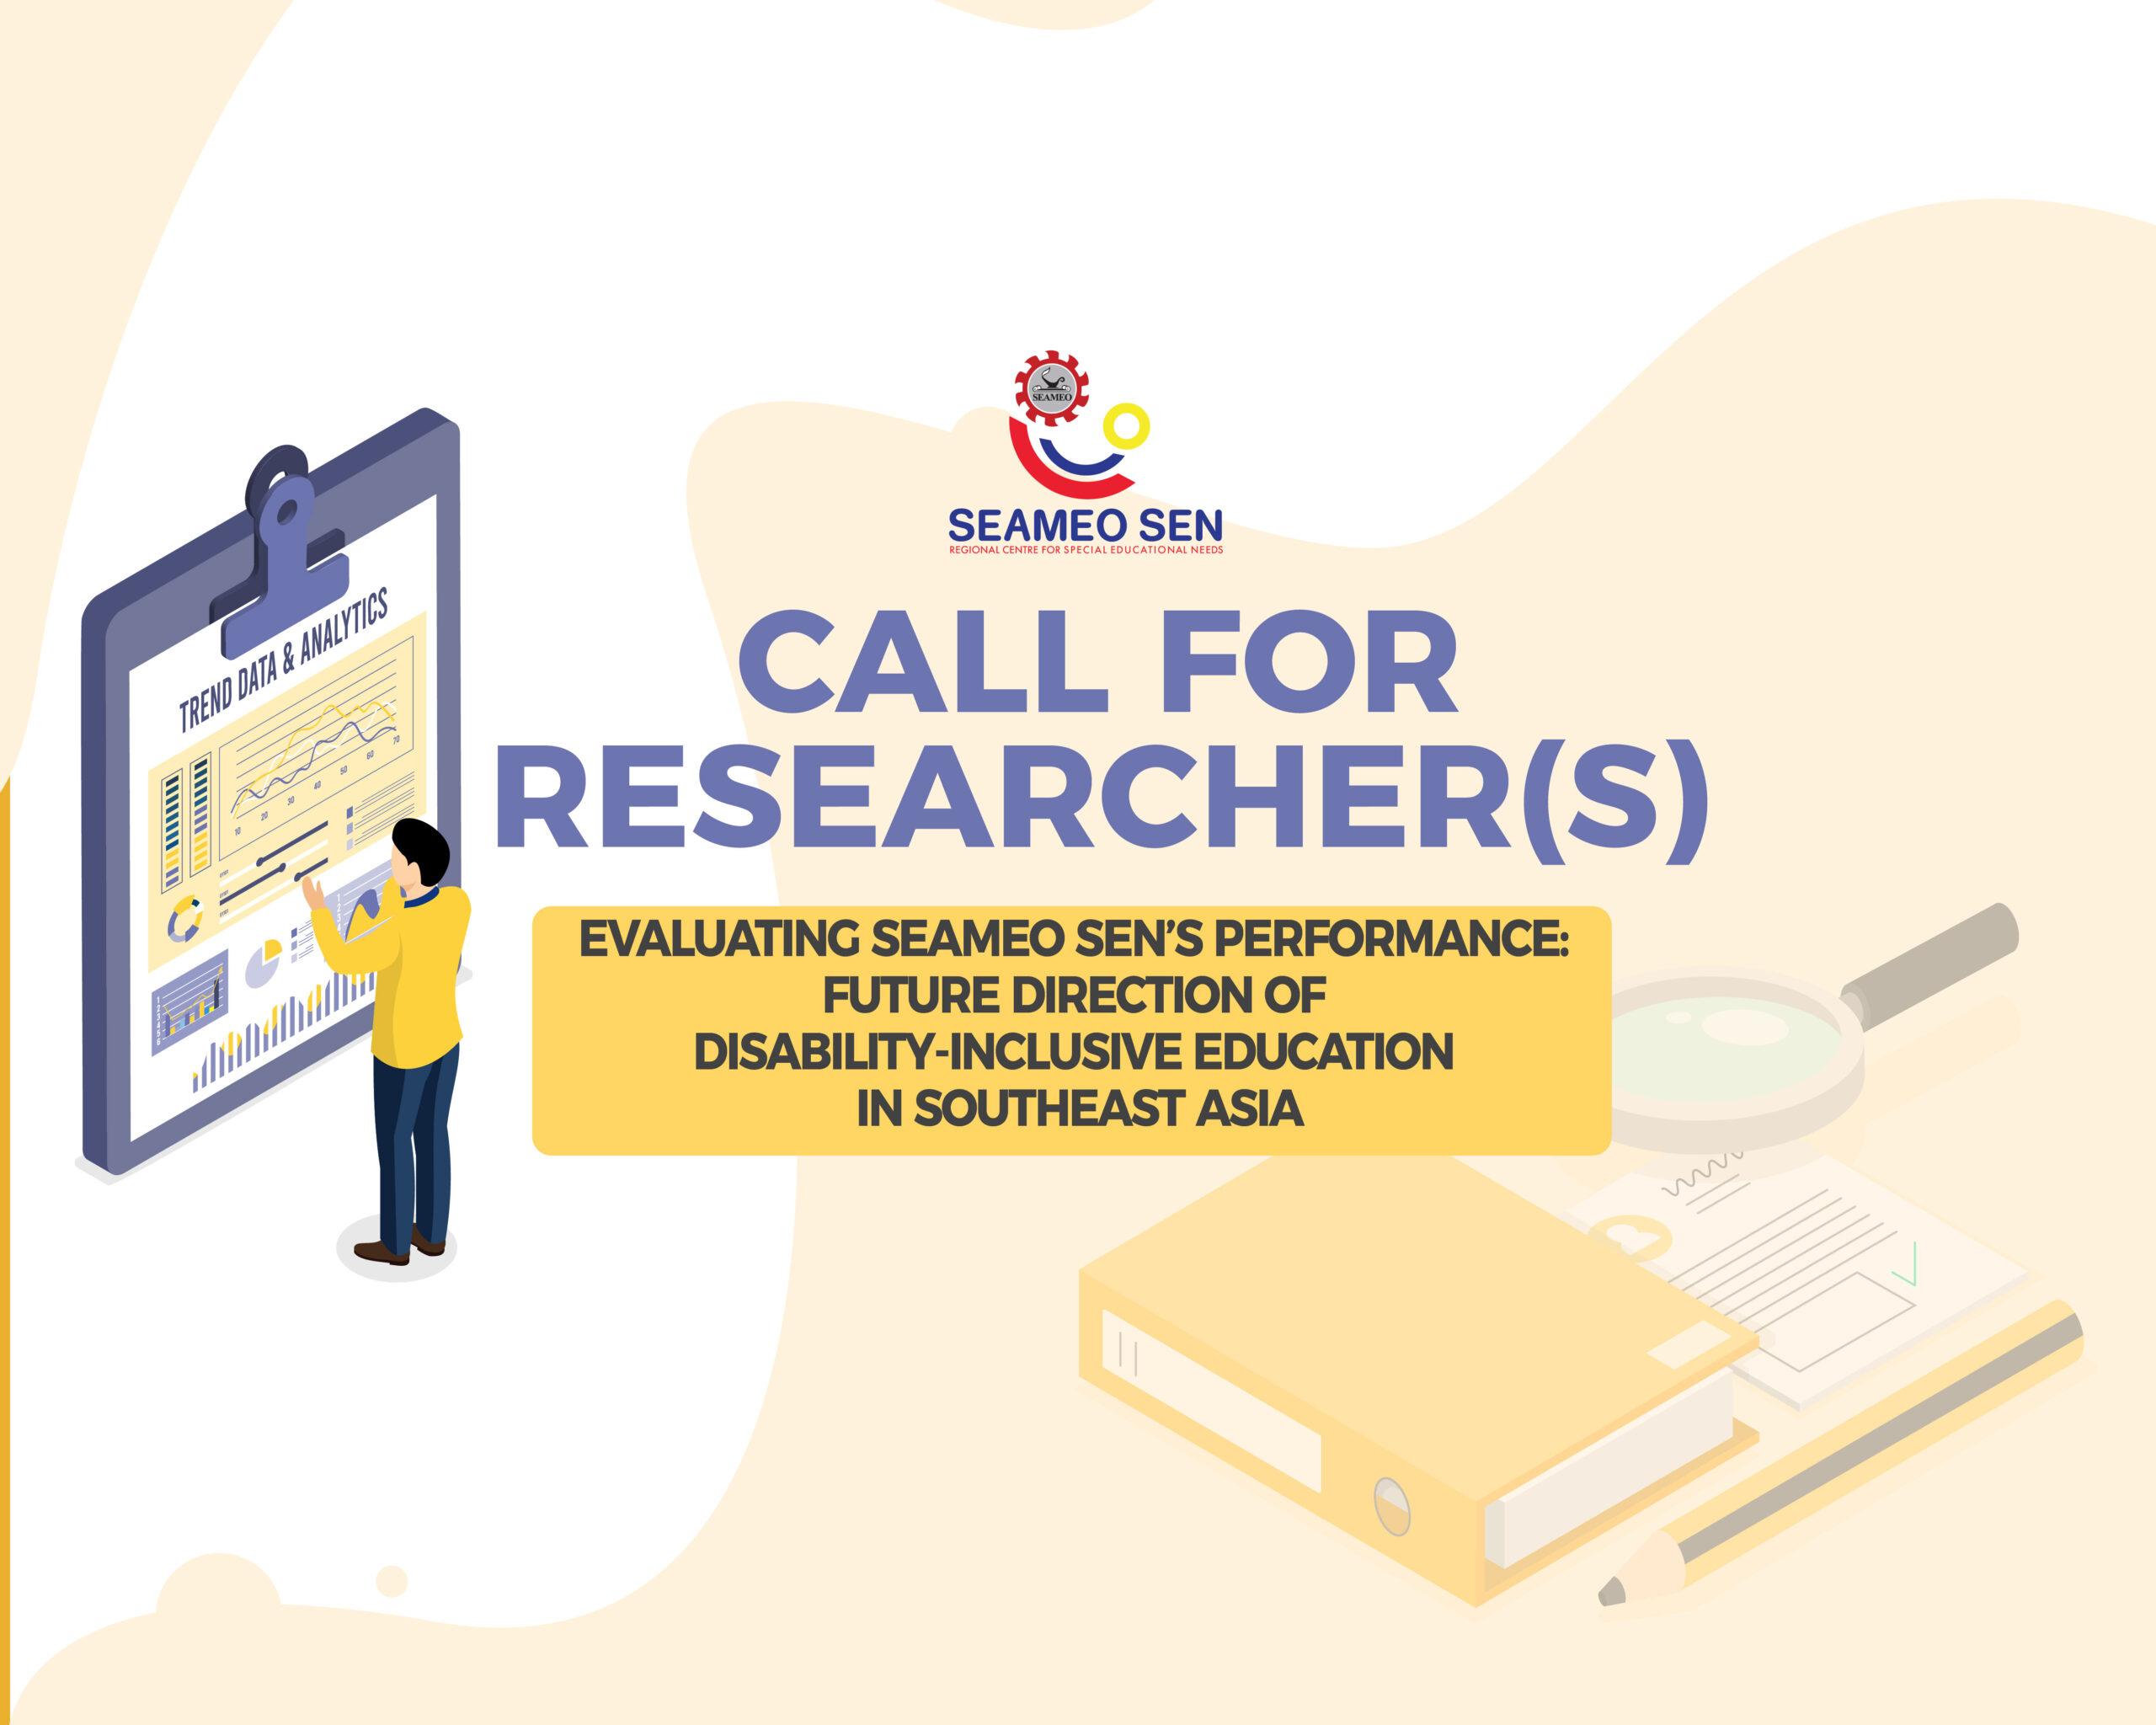 CALL FOR RESEARCHER(S) Evaluating SEAMEO SEN’s Performance: Future Direction of Disability-Inclusive Education in Southeast Asia